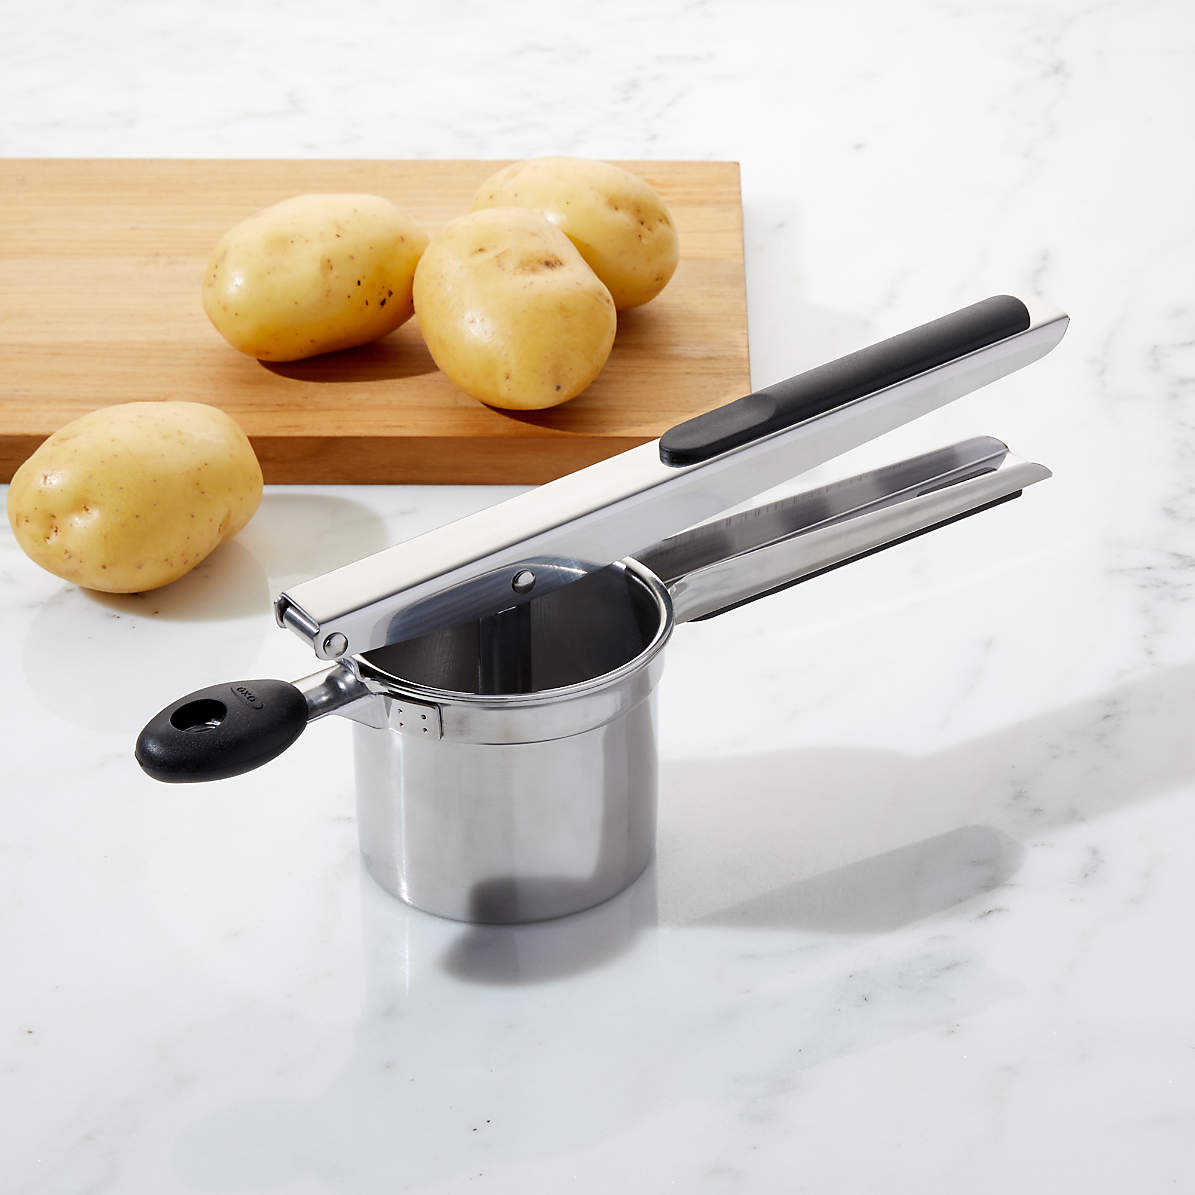 where can i find a potato ricer